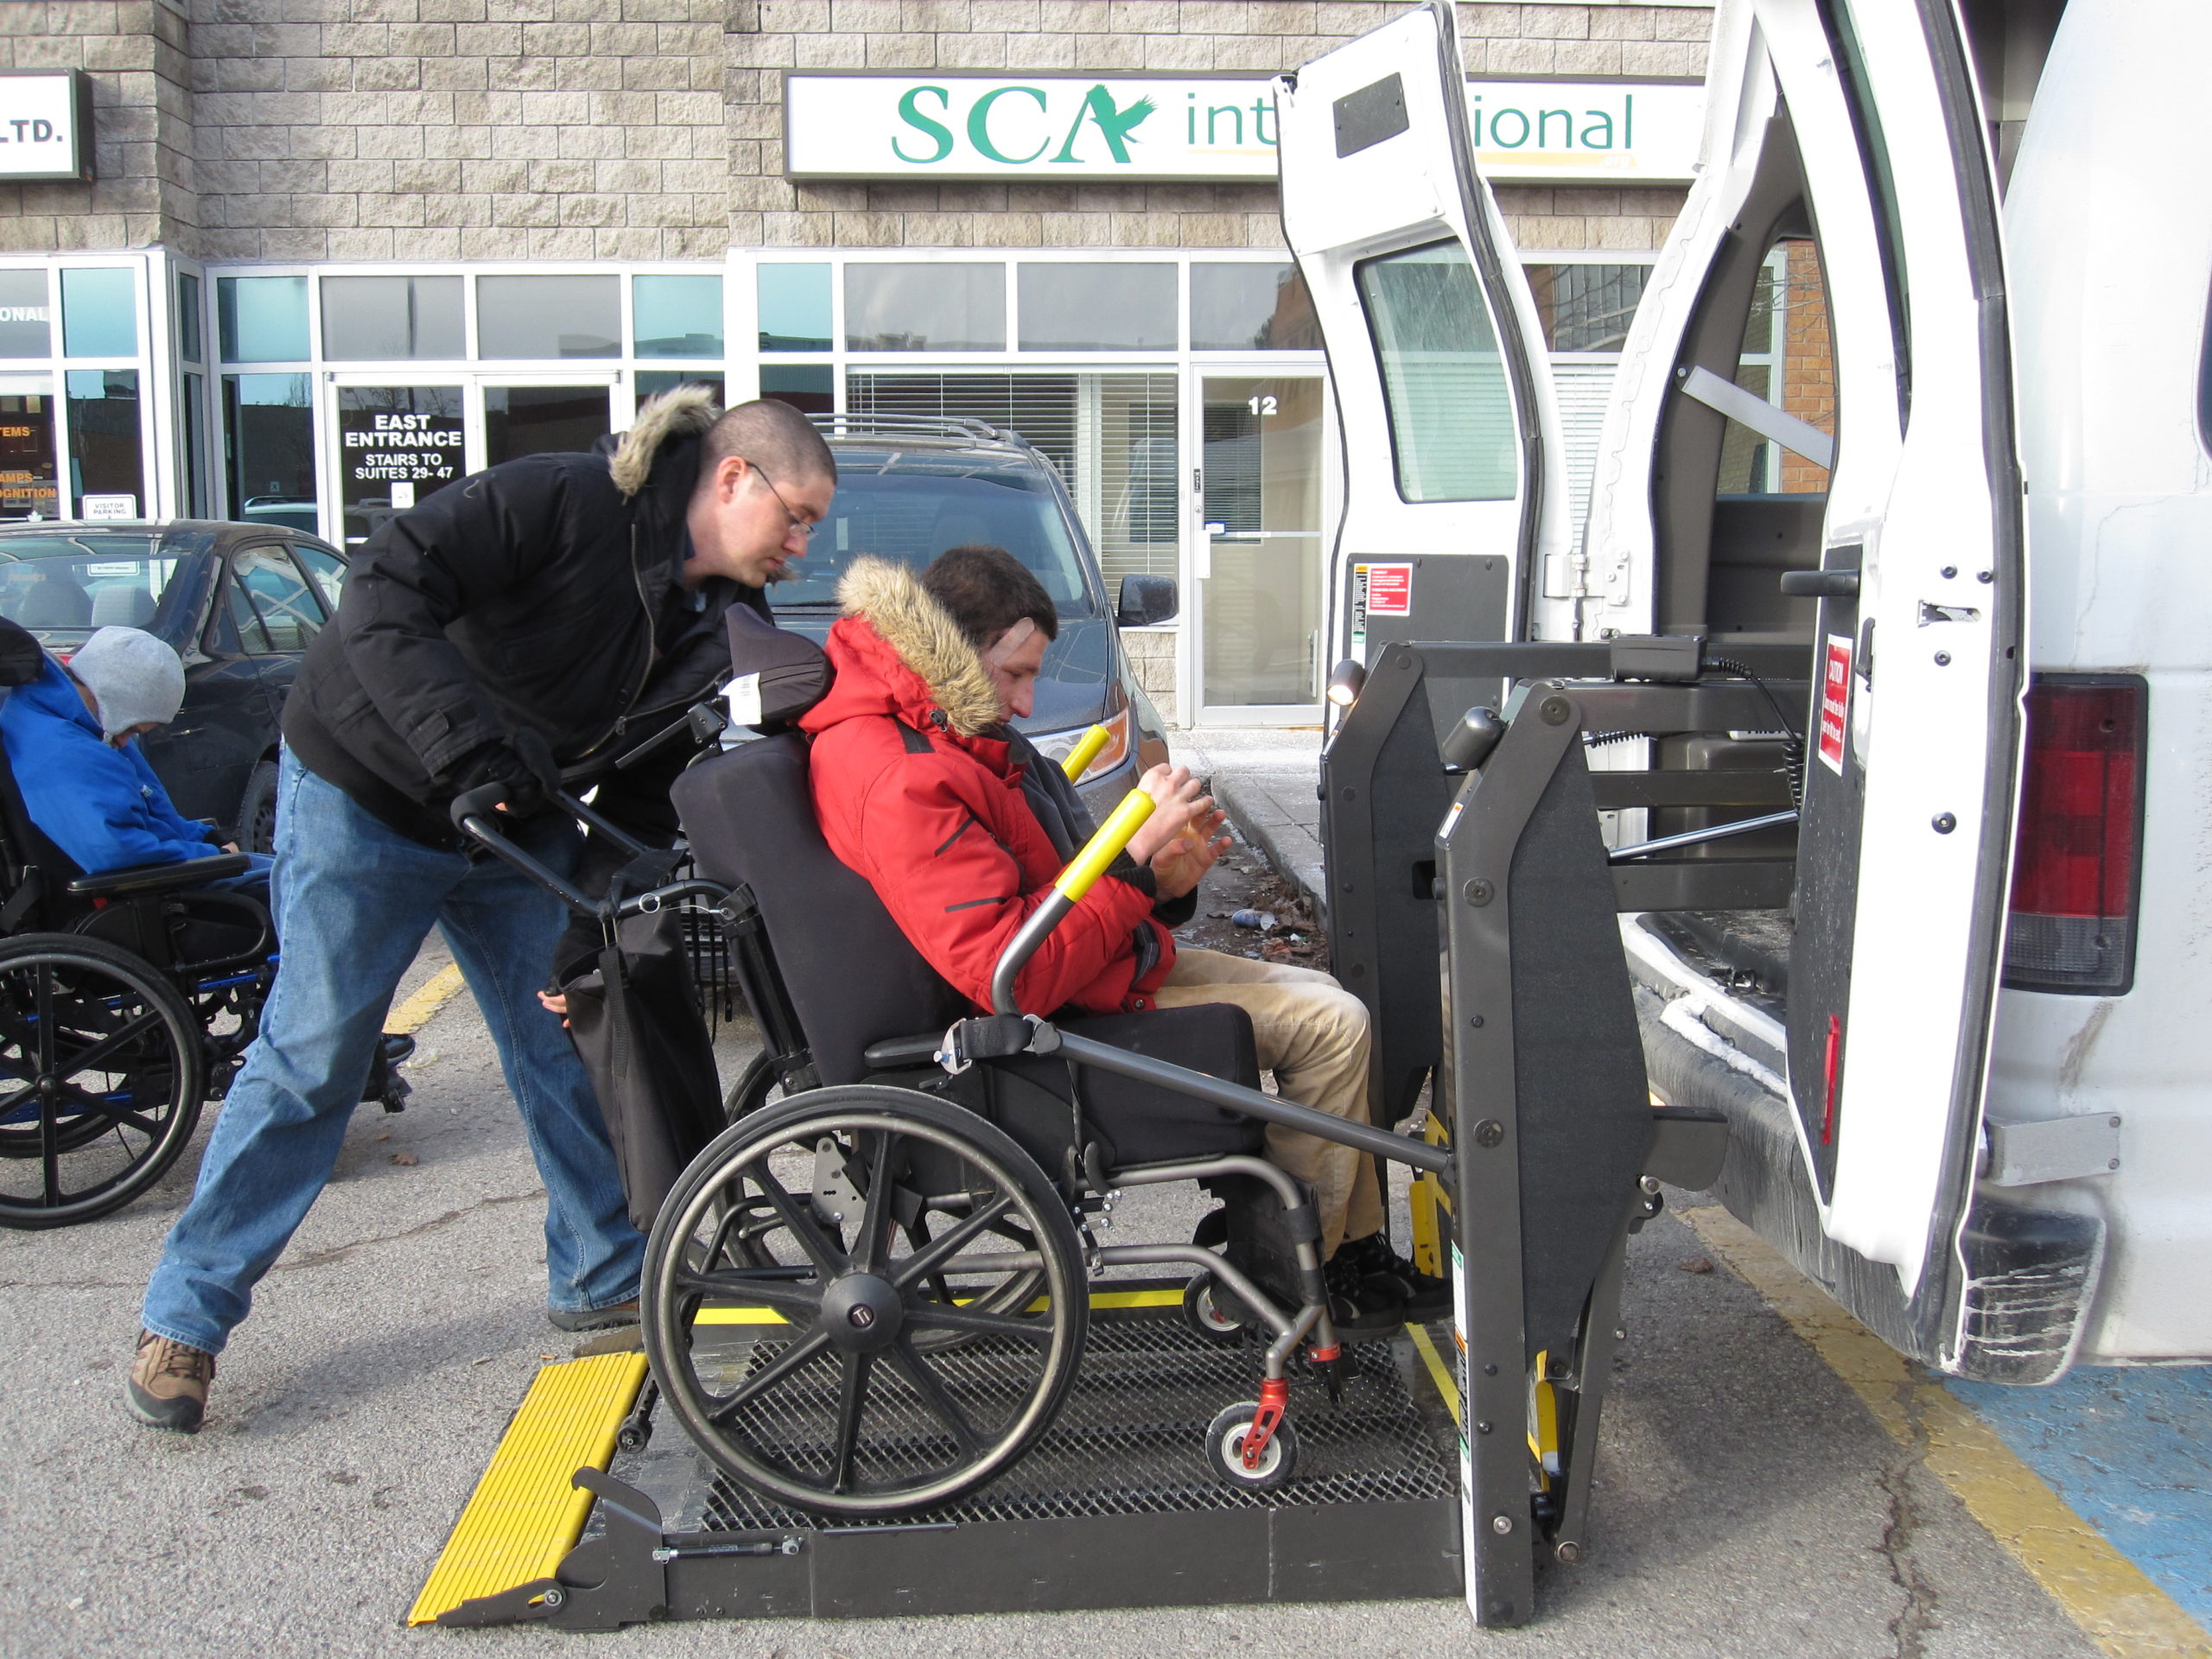 An intervenor pushes a young man in a wheelchair up a ramp into an accessible van.